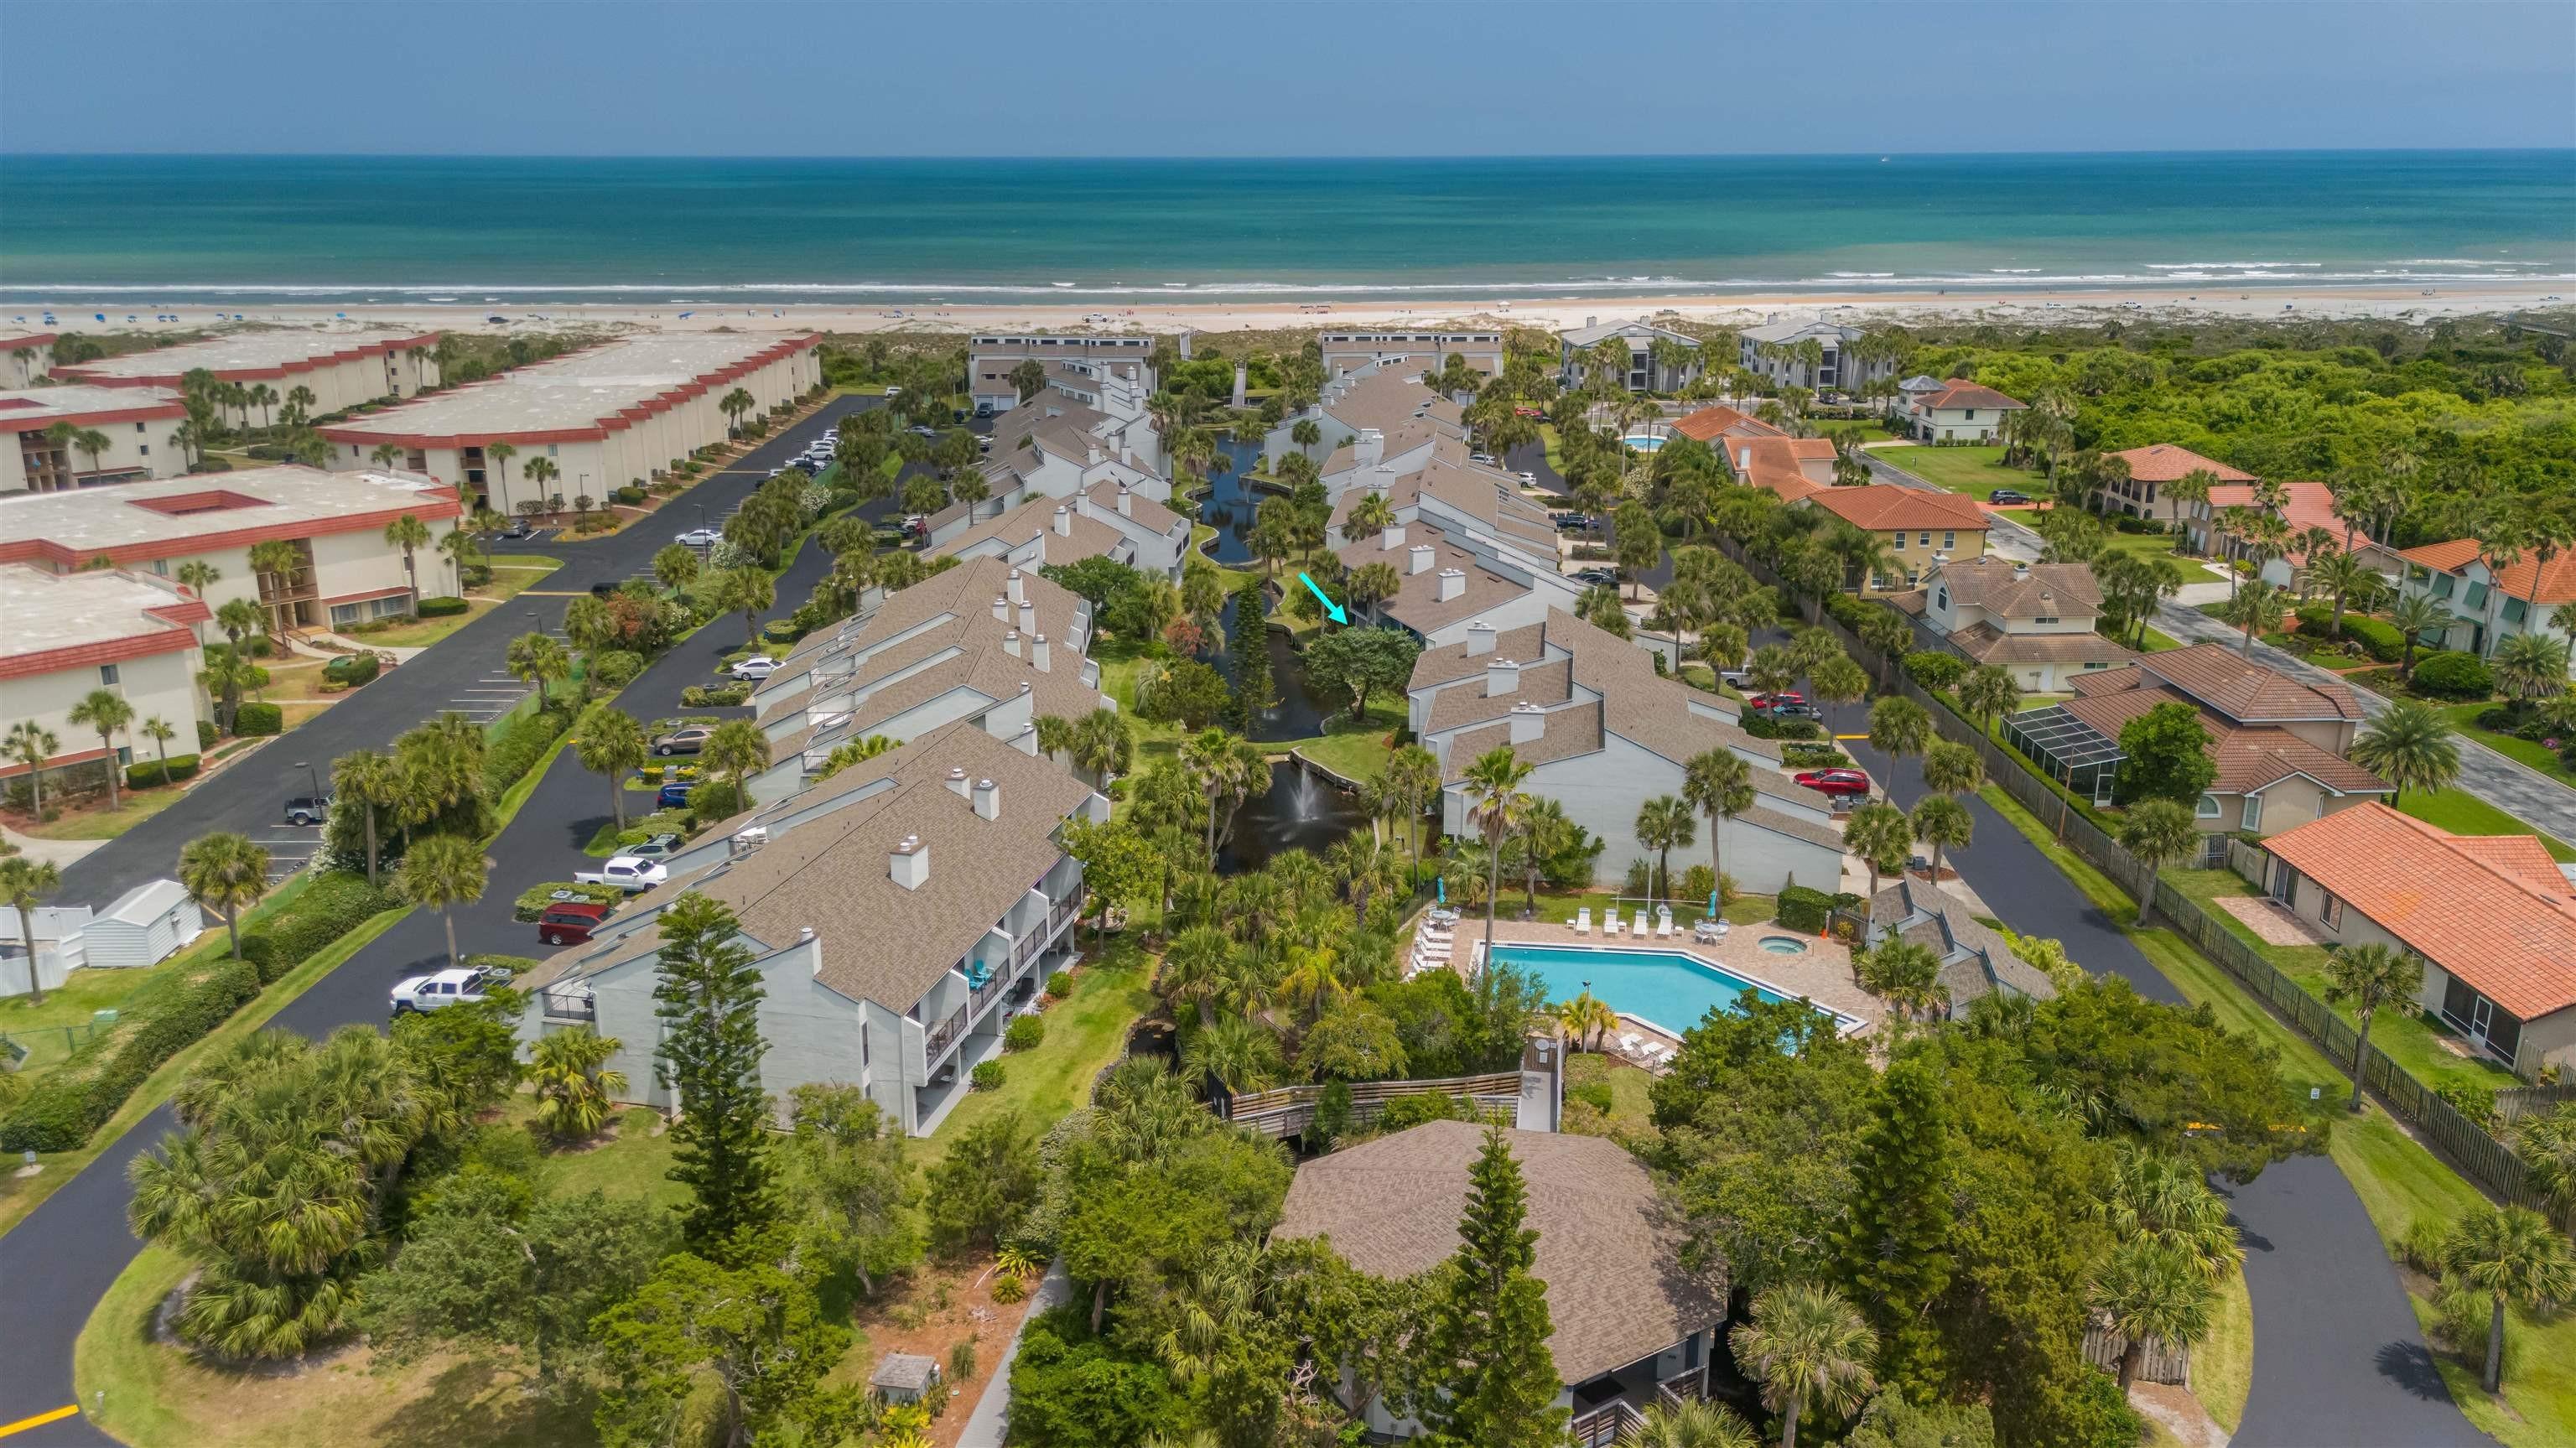 Property Image for 890 A1a Beach Blvd 72